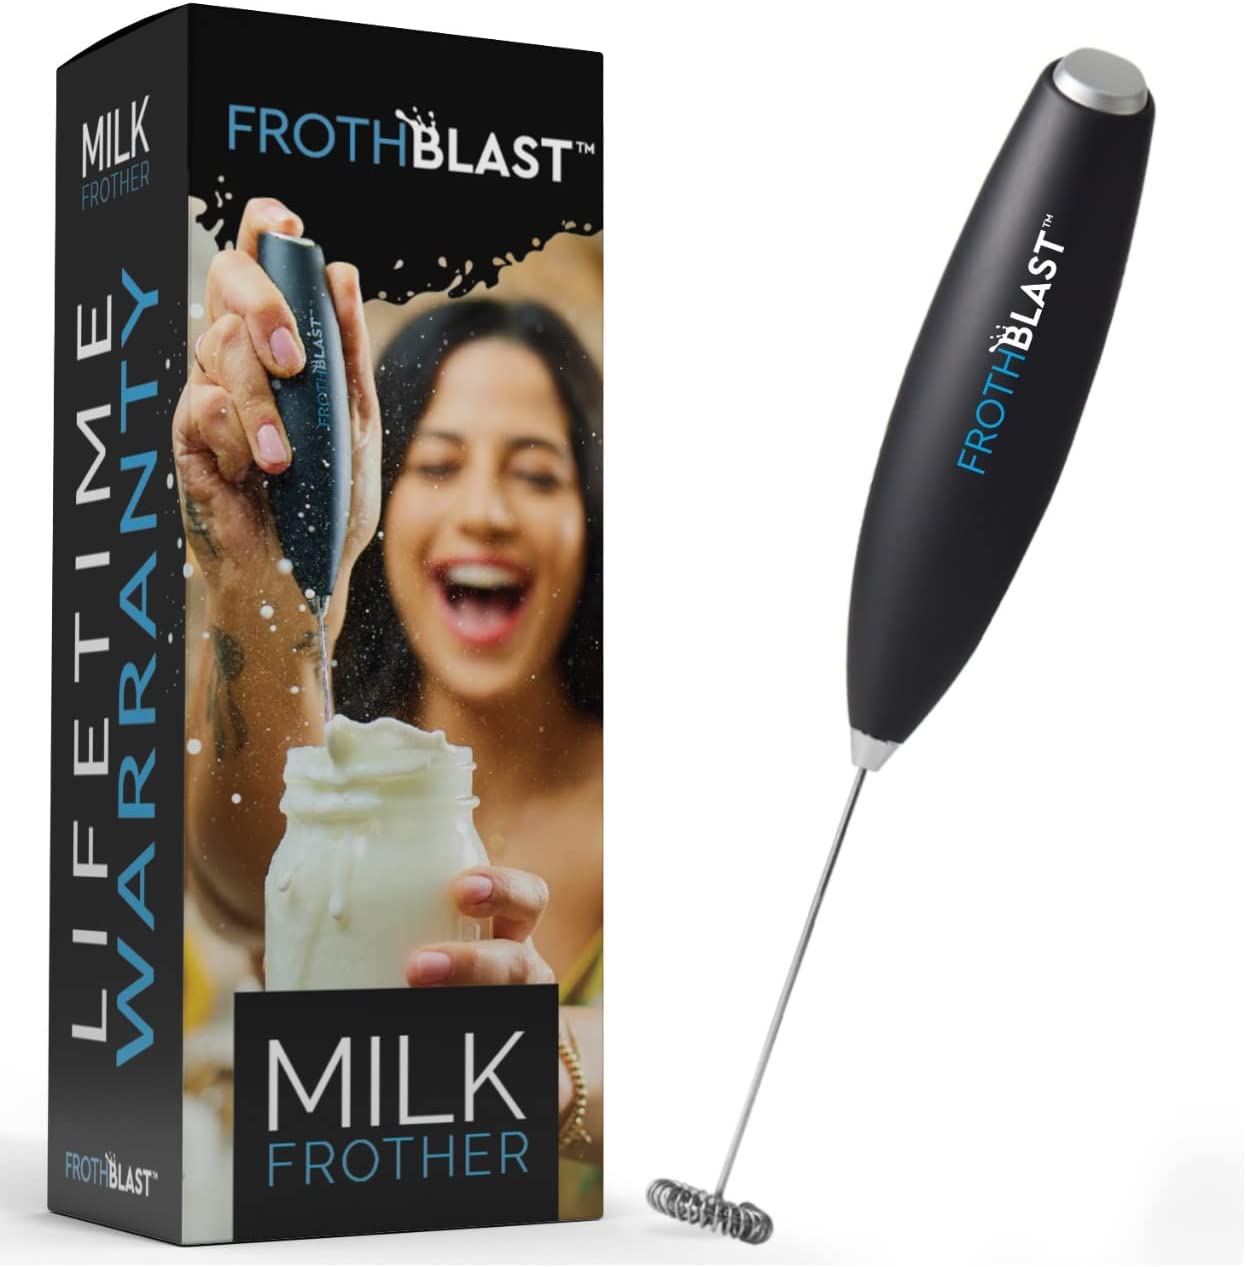 ElitaPro High-Speed 19,000 RPM, Milk Frother Double Whisk Egg